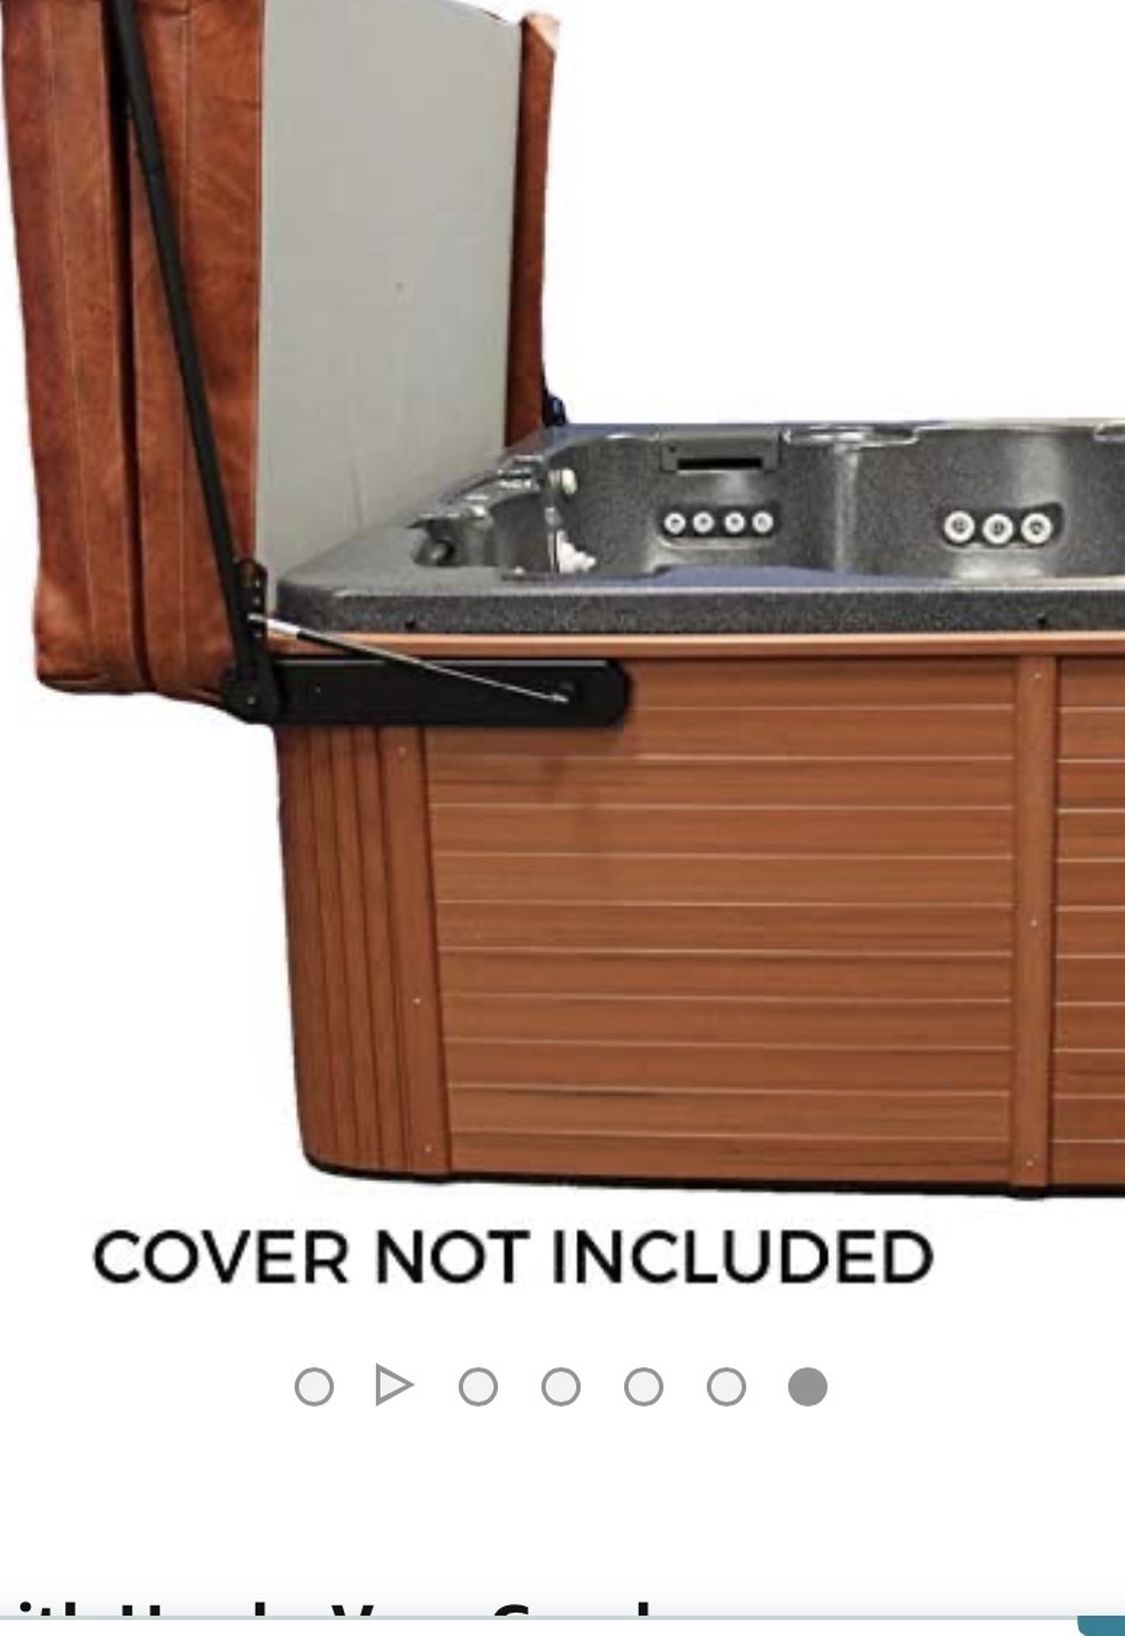 Spa ease Hydraulic Spa Cover Lift-cover Not Included